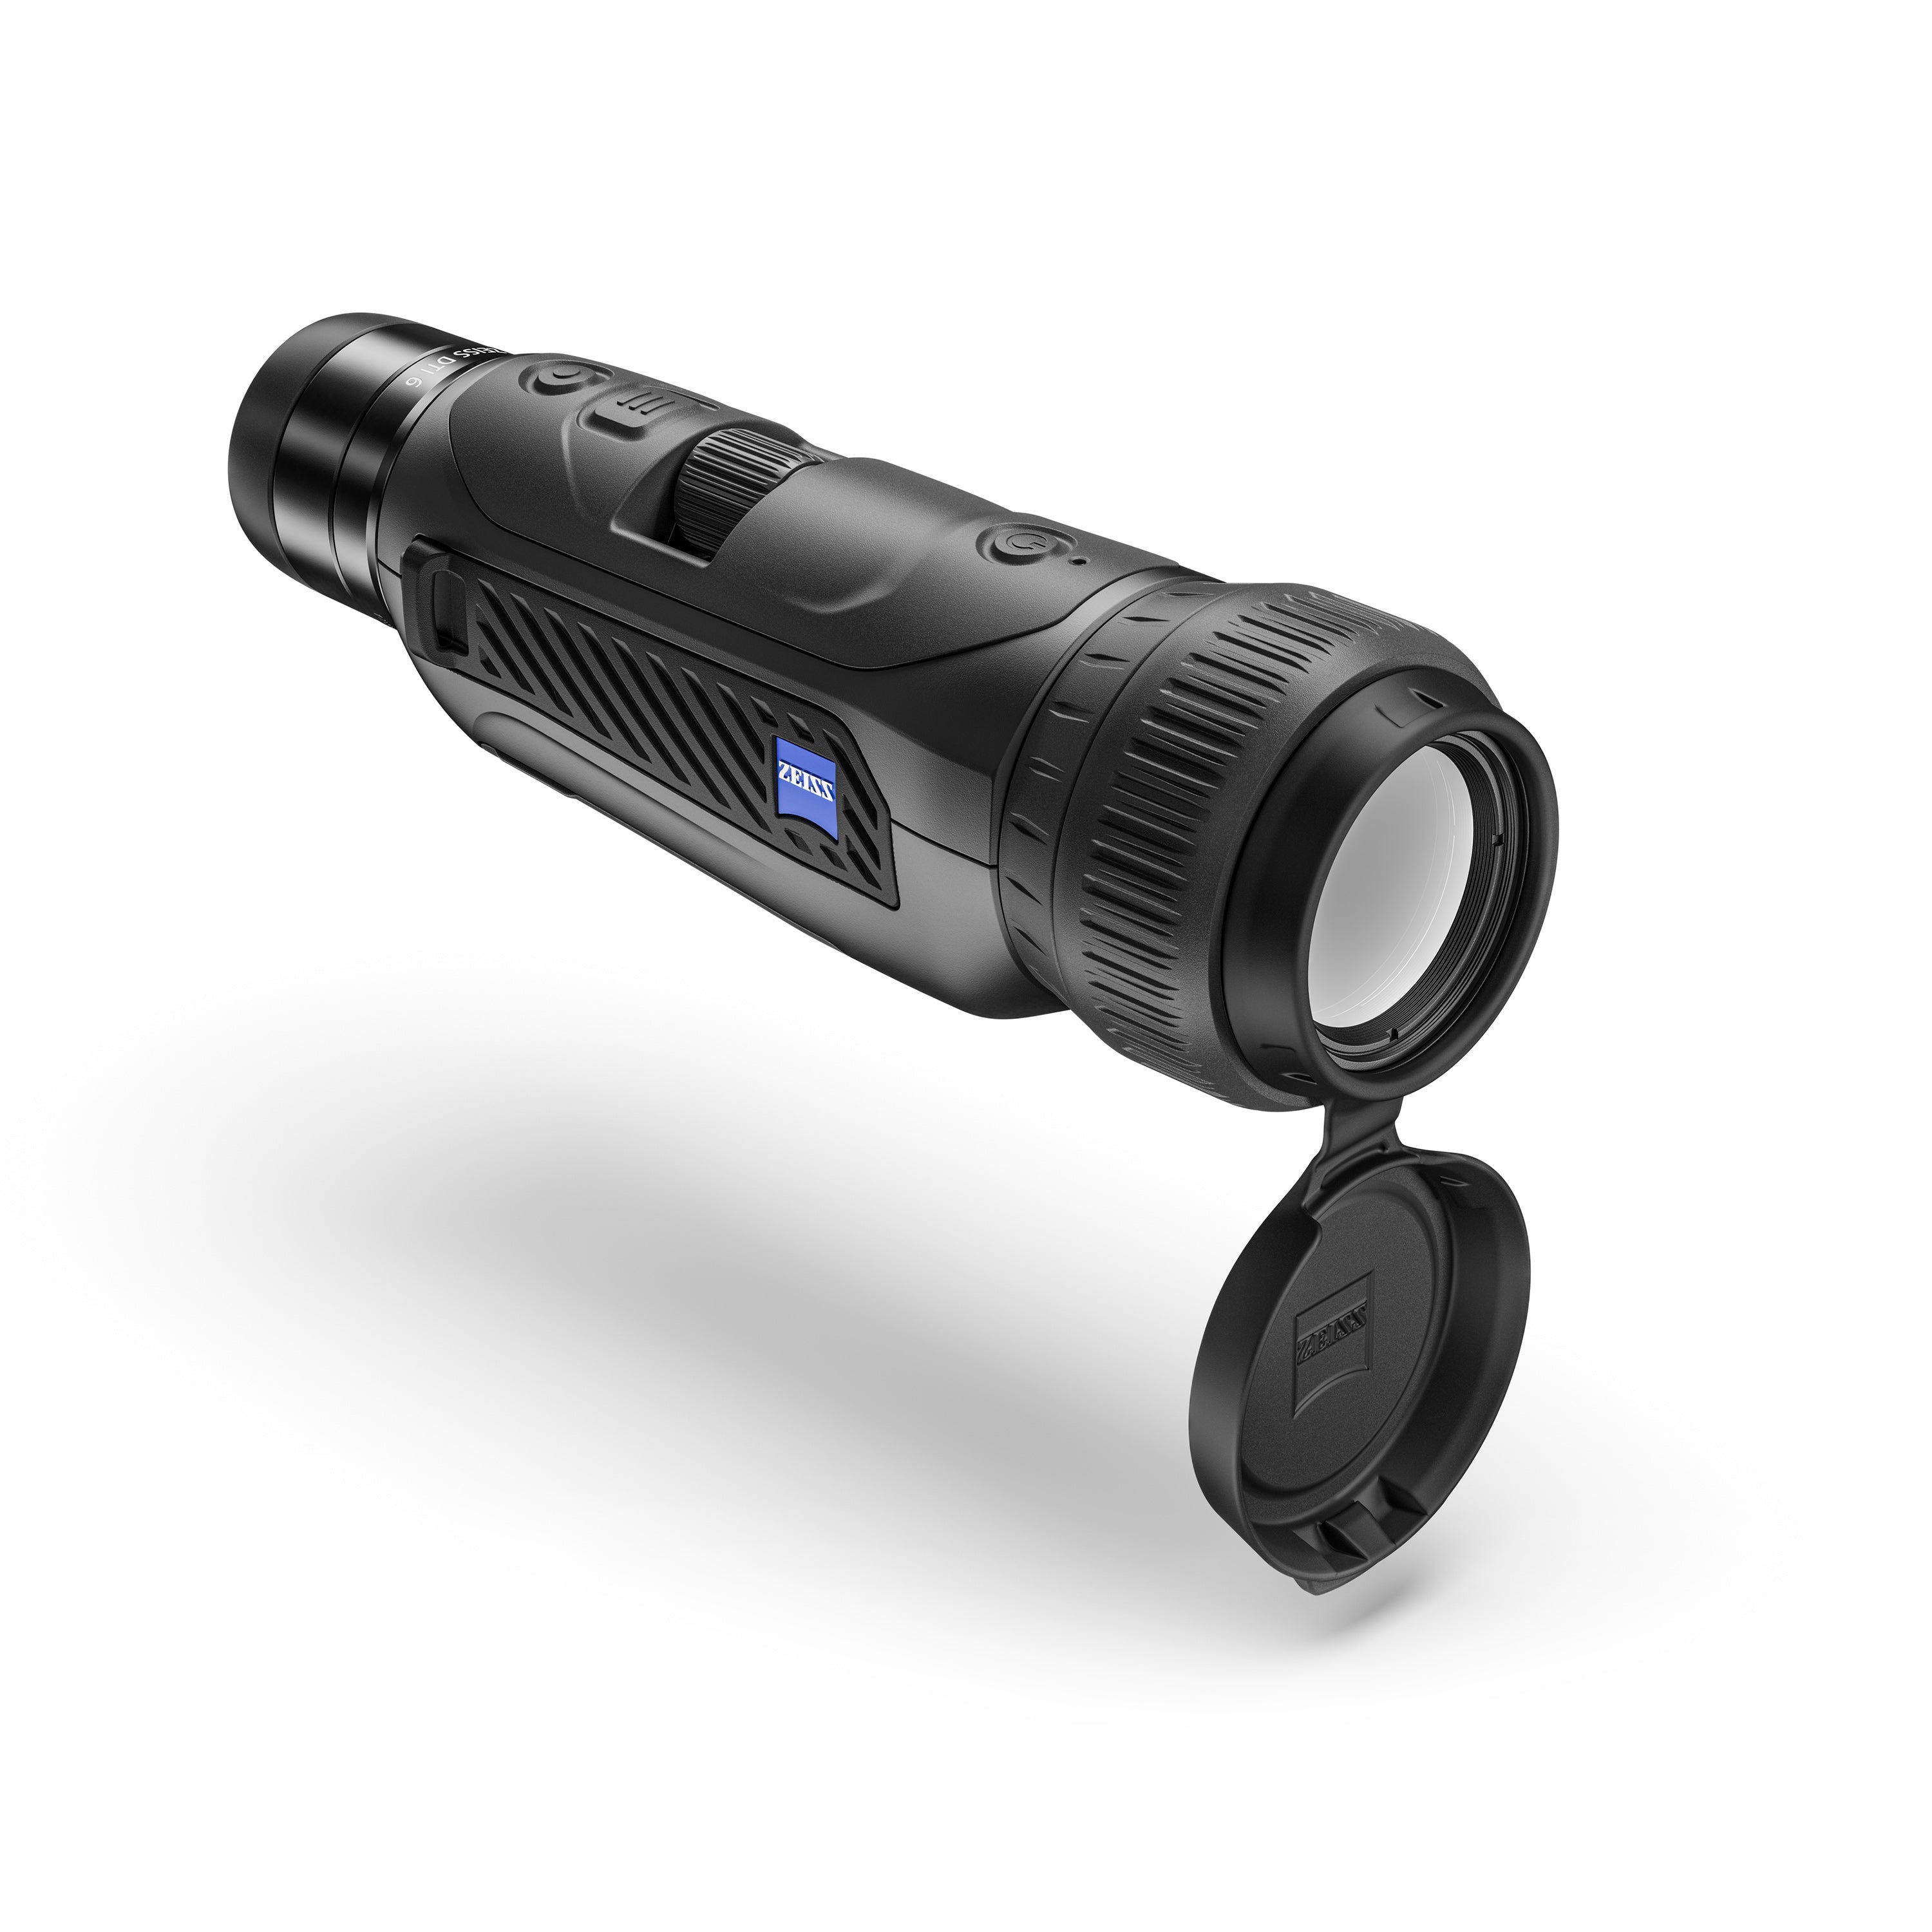 ZEISS DTI 6 Thermal Imaging Camera High-Resolution Monocular for Hunting and Wildlife Observation